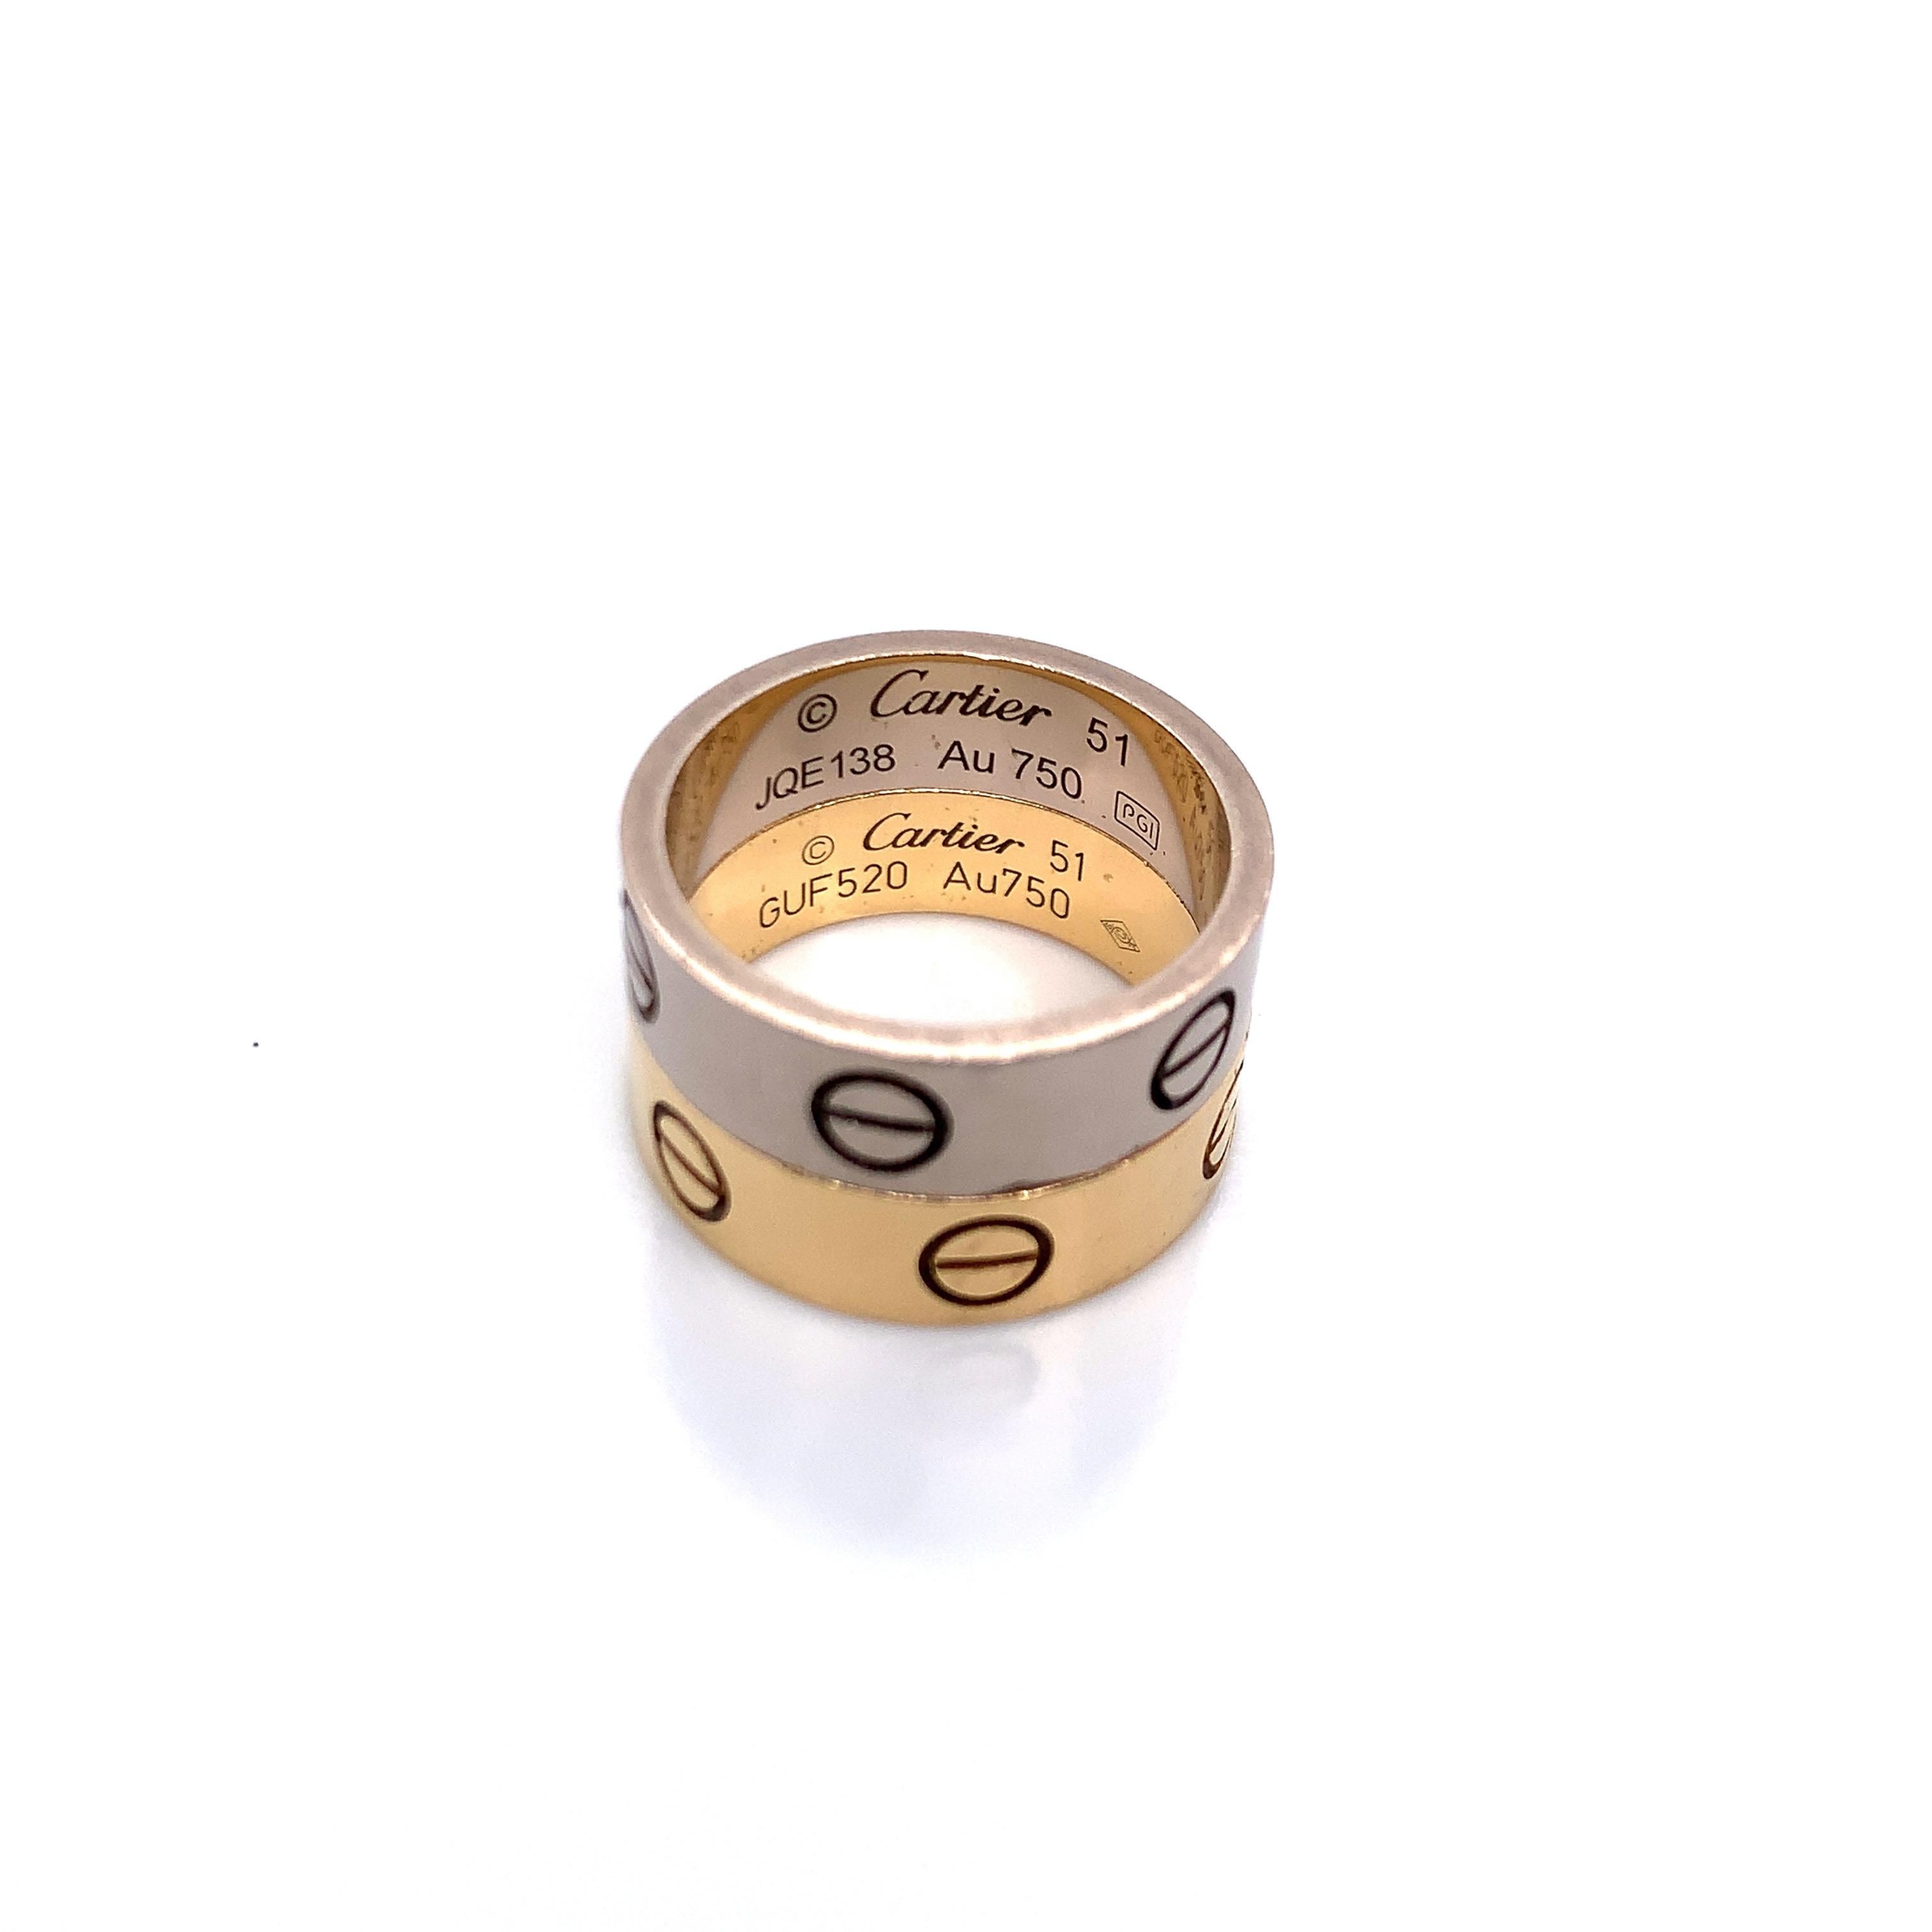 A set of two 18k Cartier Love rings (yellow gold and white gold) (750/1000). Together, they weigh 12.0 grams in size 51 (approximately 5.75 in US).

Serial Nos. GUF520 & JQE138